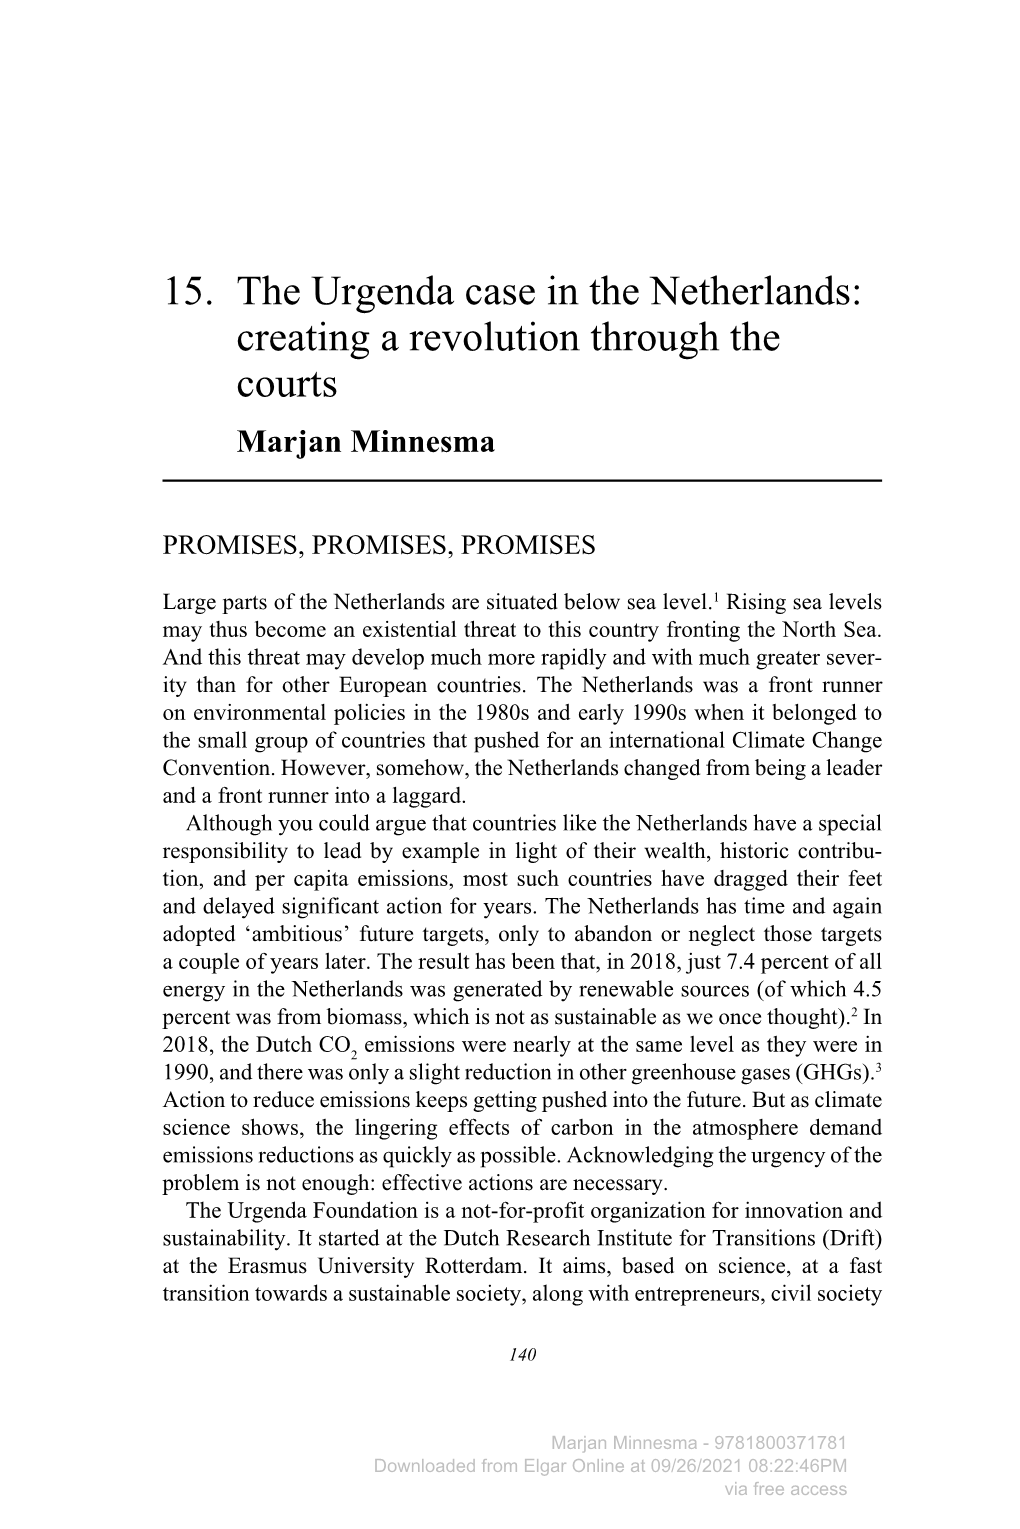 15. the Urgenda Case in the Netherlands: Creating a Revolution Through the Courts Marjan Minnesma